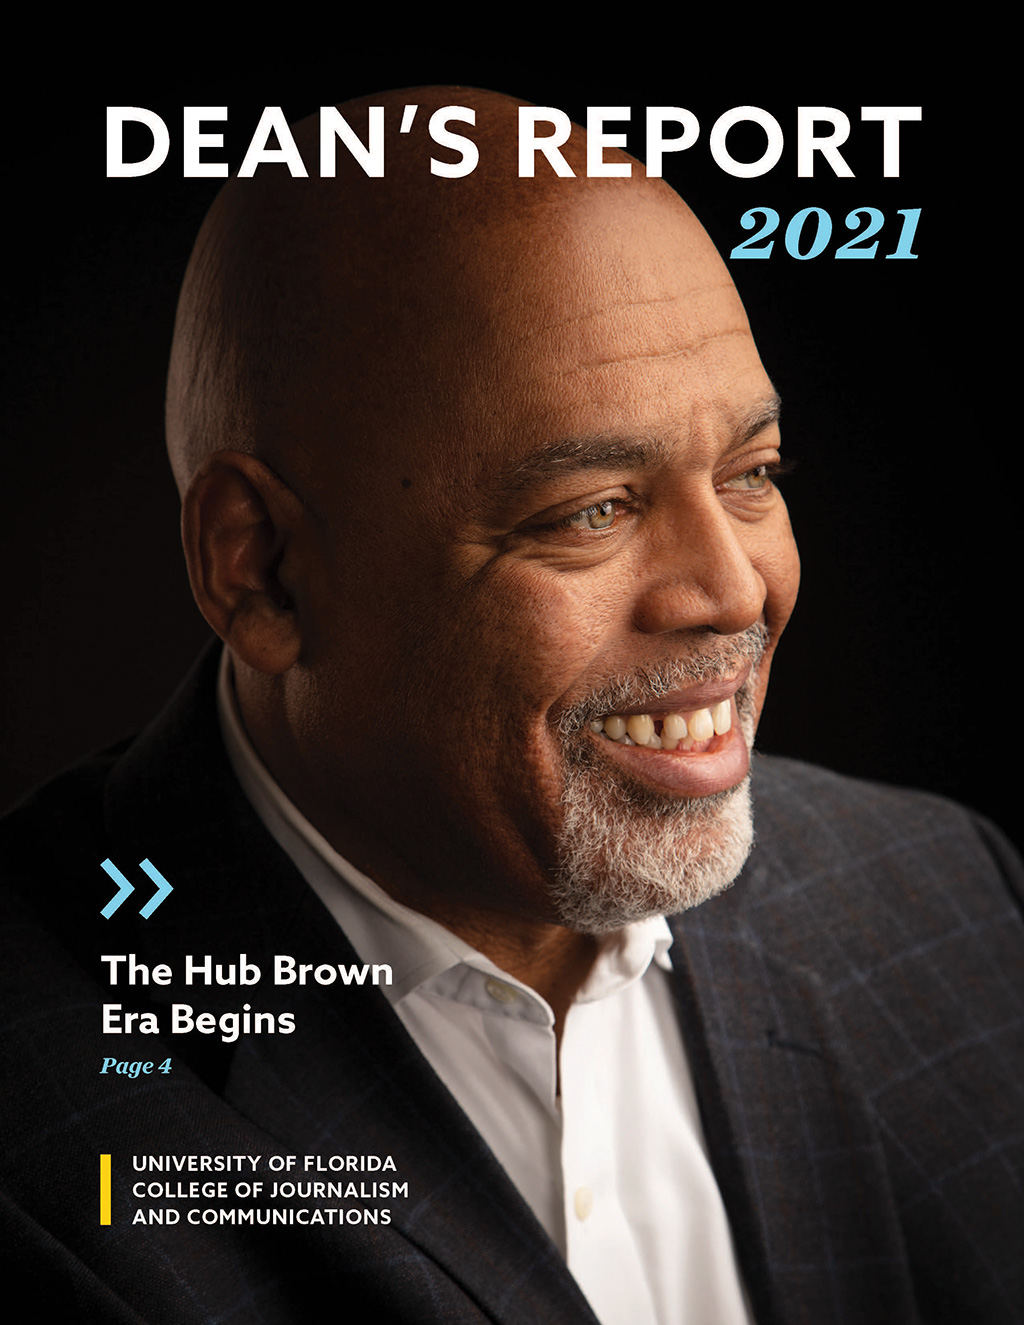 Dean’s Report 2021 UF College of Journalism and Communications